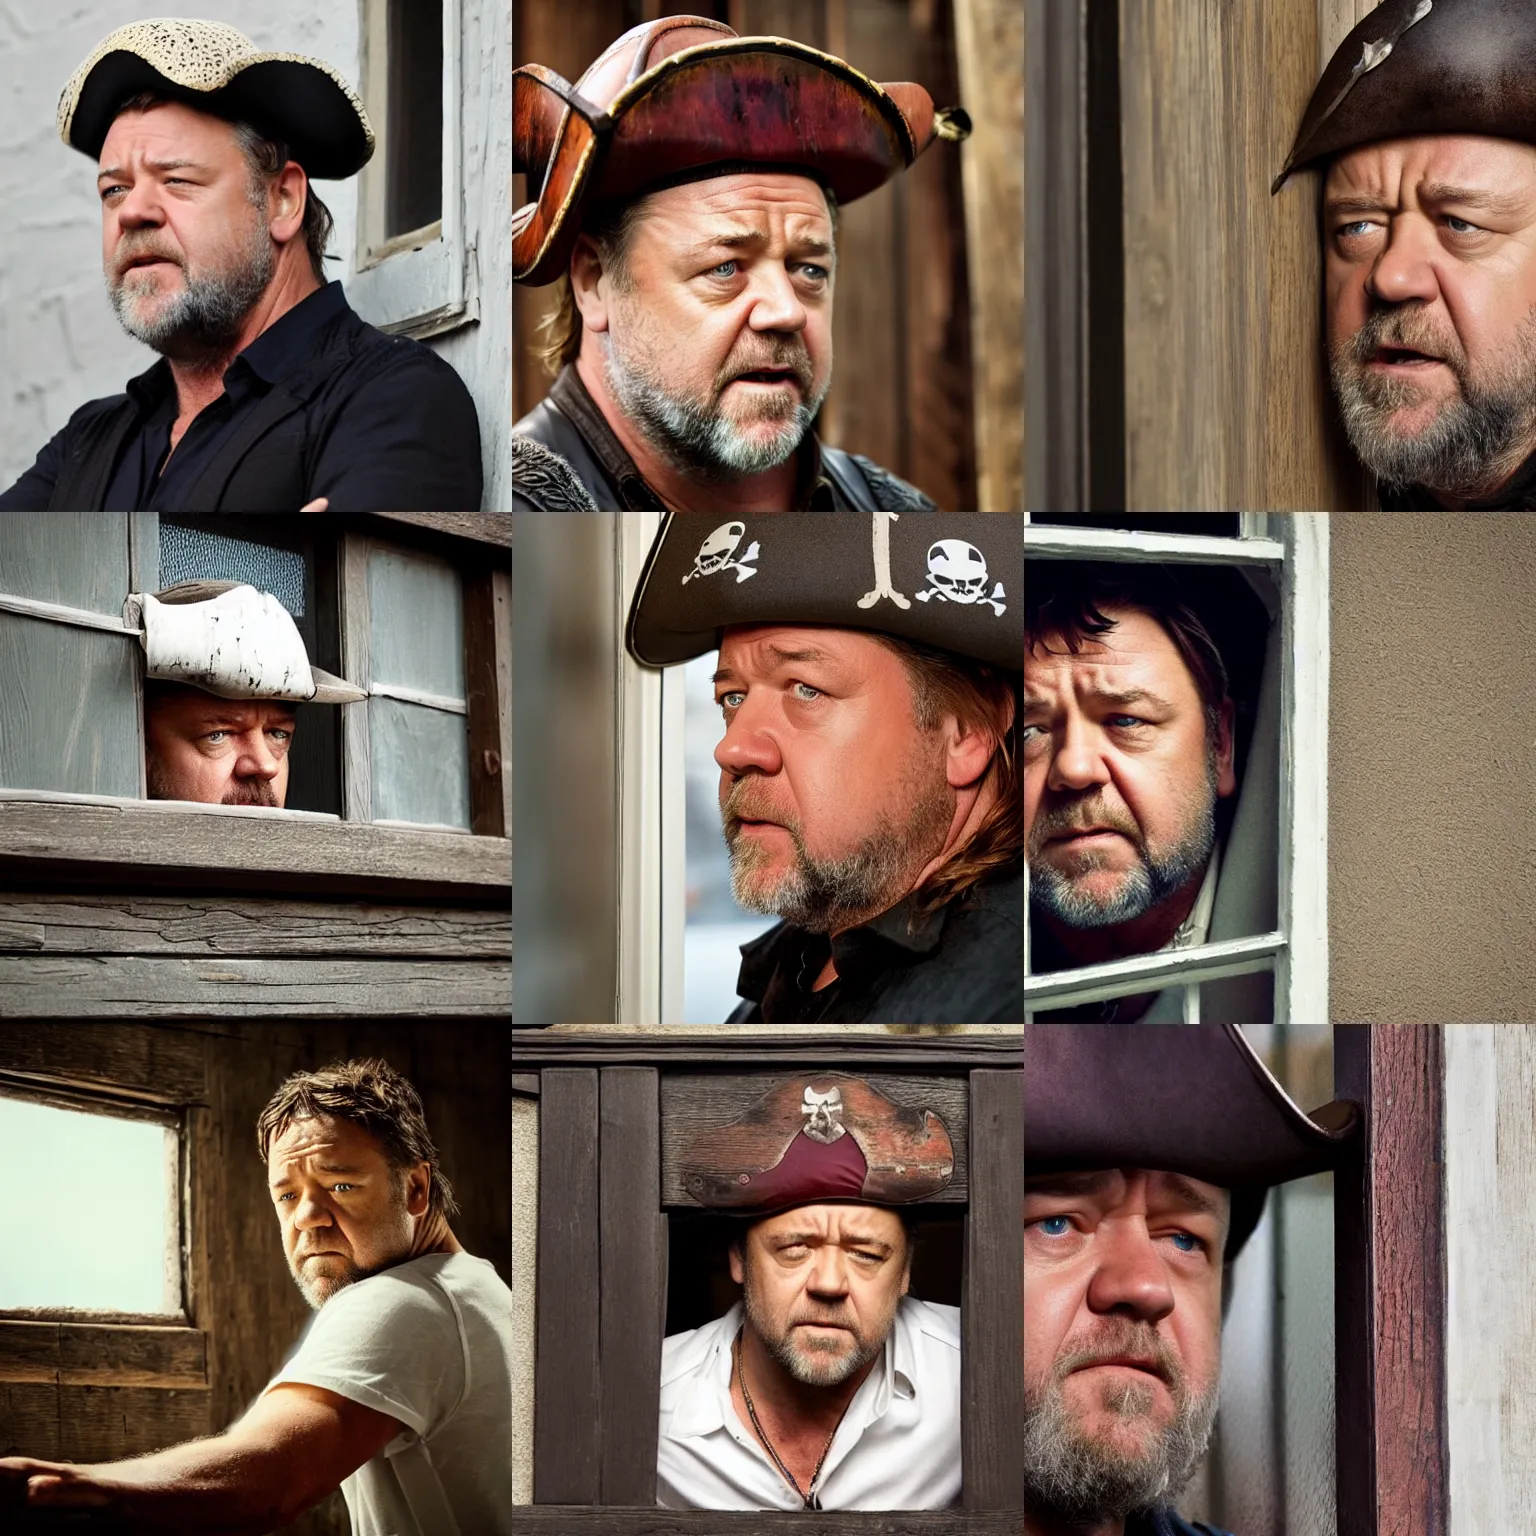 Prompt: concerned russell crowe with pirate hat peering out from a small window, wooden wall